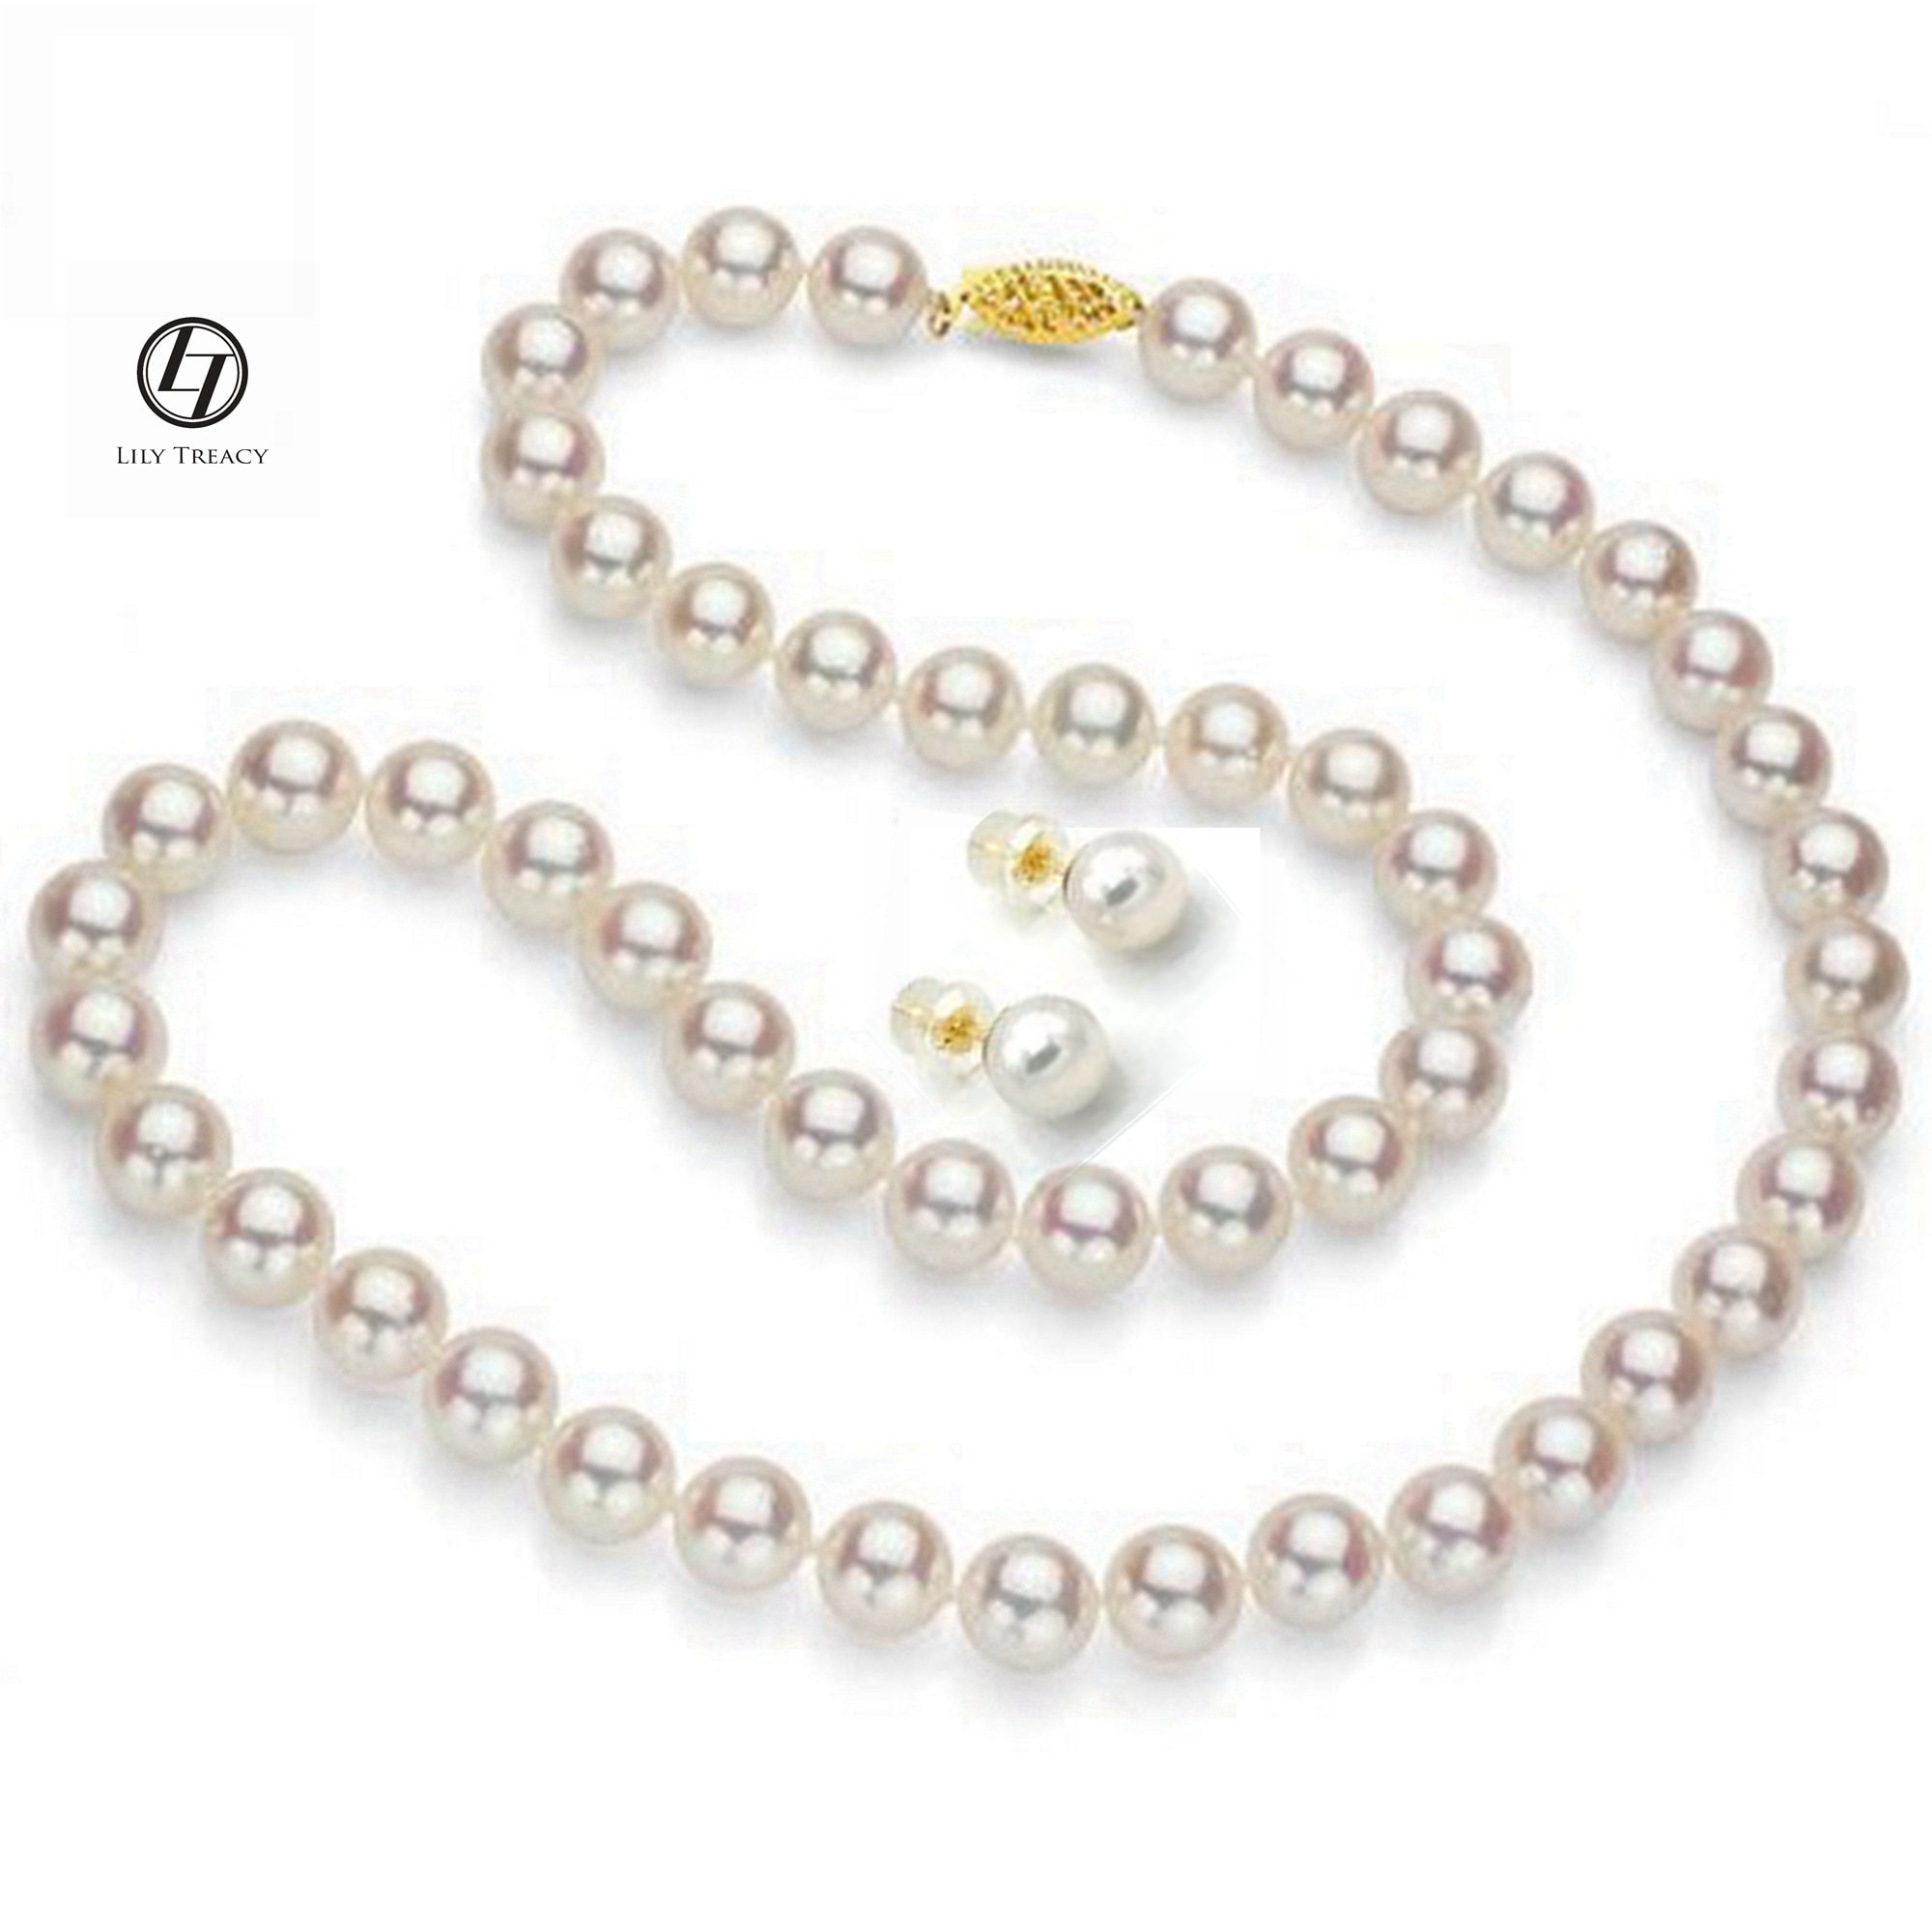 Japanese Akoya 9-9.5mm AAA High Quality Round Pearl Necklace 18K Yellow Gold Pinkish White No Earrings